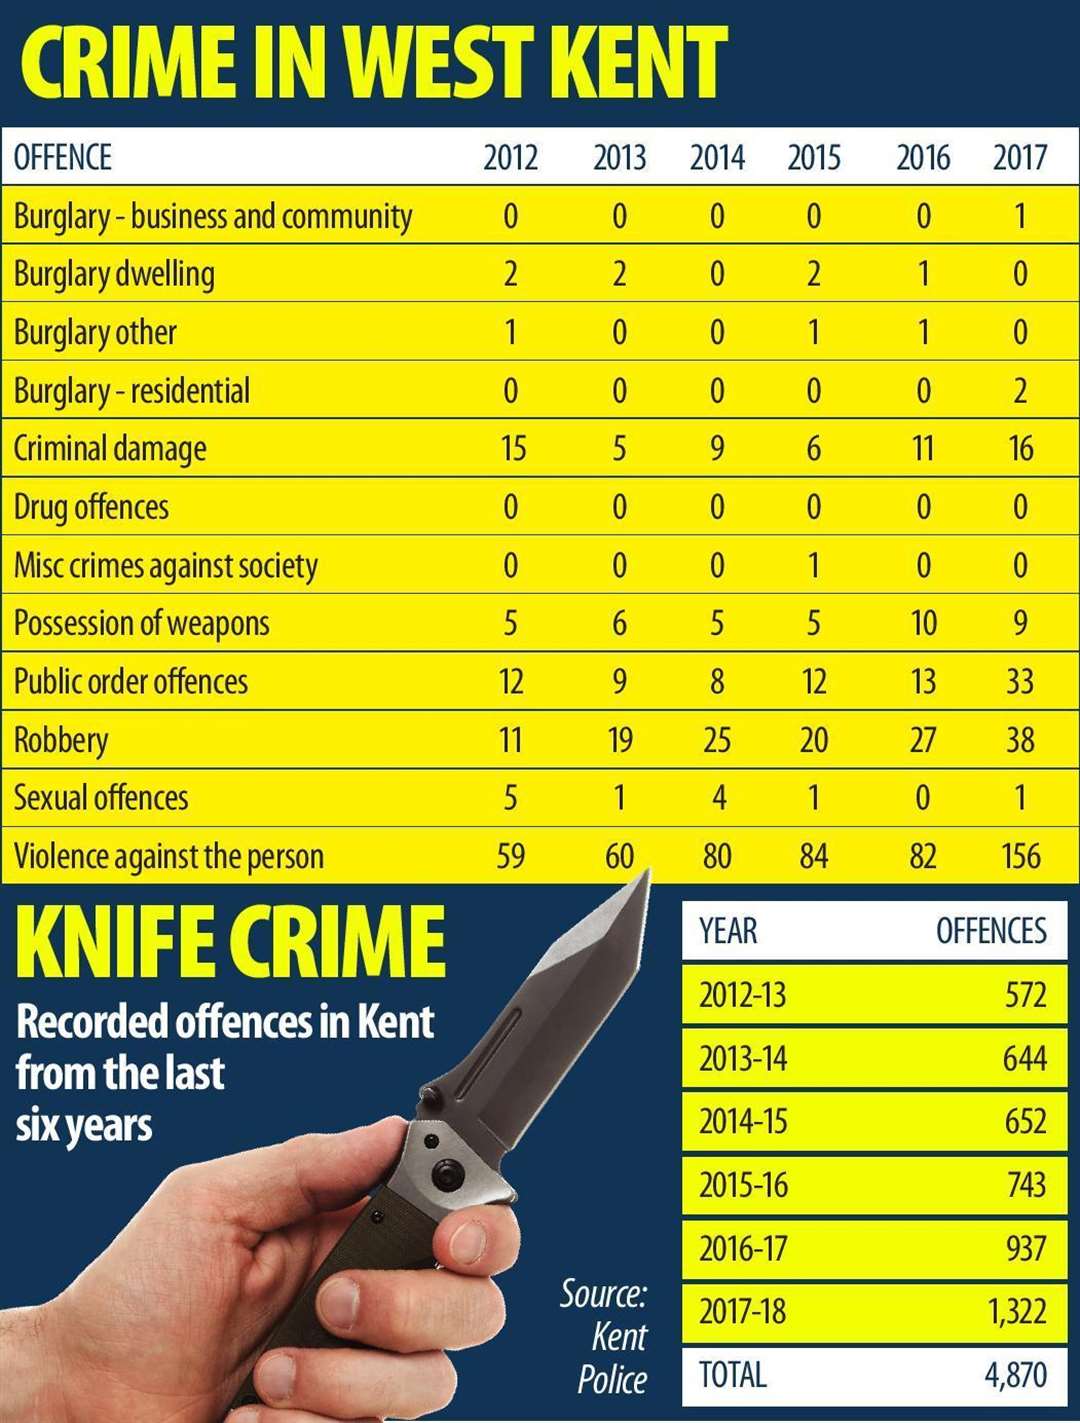 Knife crime statistics in West Kent between 2012 and 2017 (2396179)